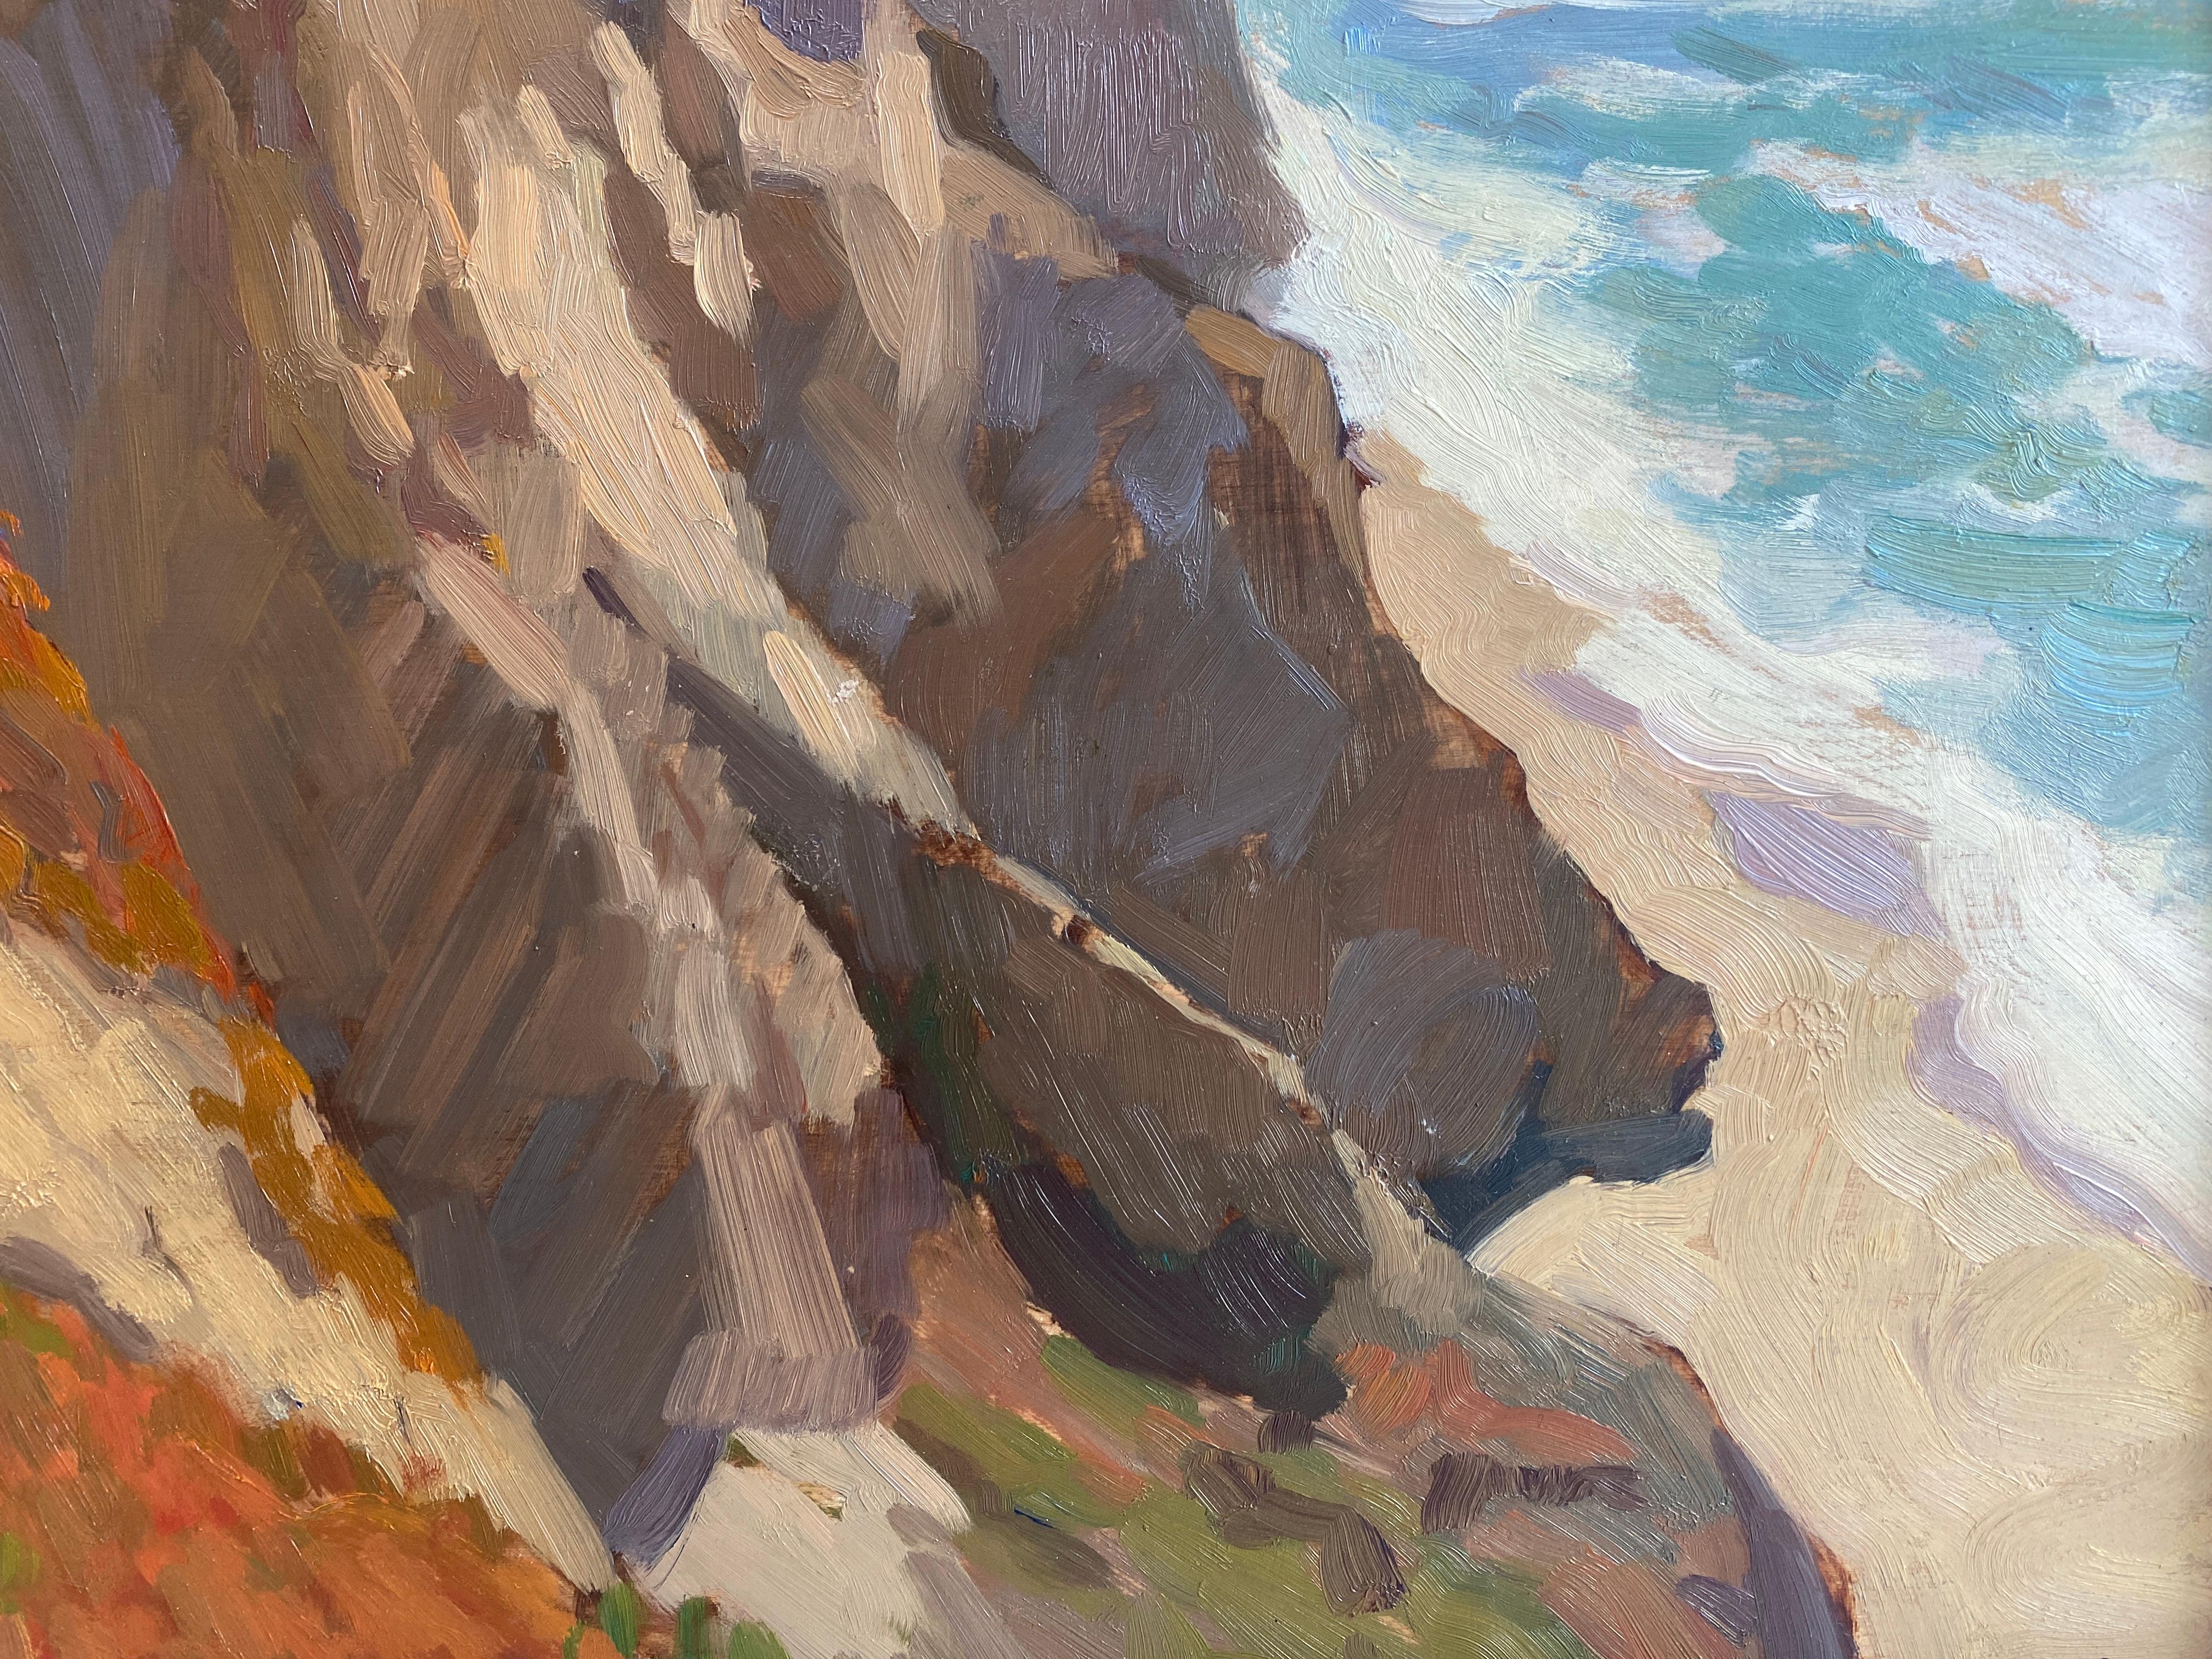 An oil painting on the cliffs off of Moss Beach, California. Painted en plein air, Altwer embraces the elements of wind, sunlight, at heat as he 'sight-sizes' his subject and applies paint to the canvas. Altwer uses classical painting techniques as